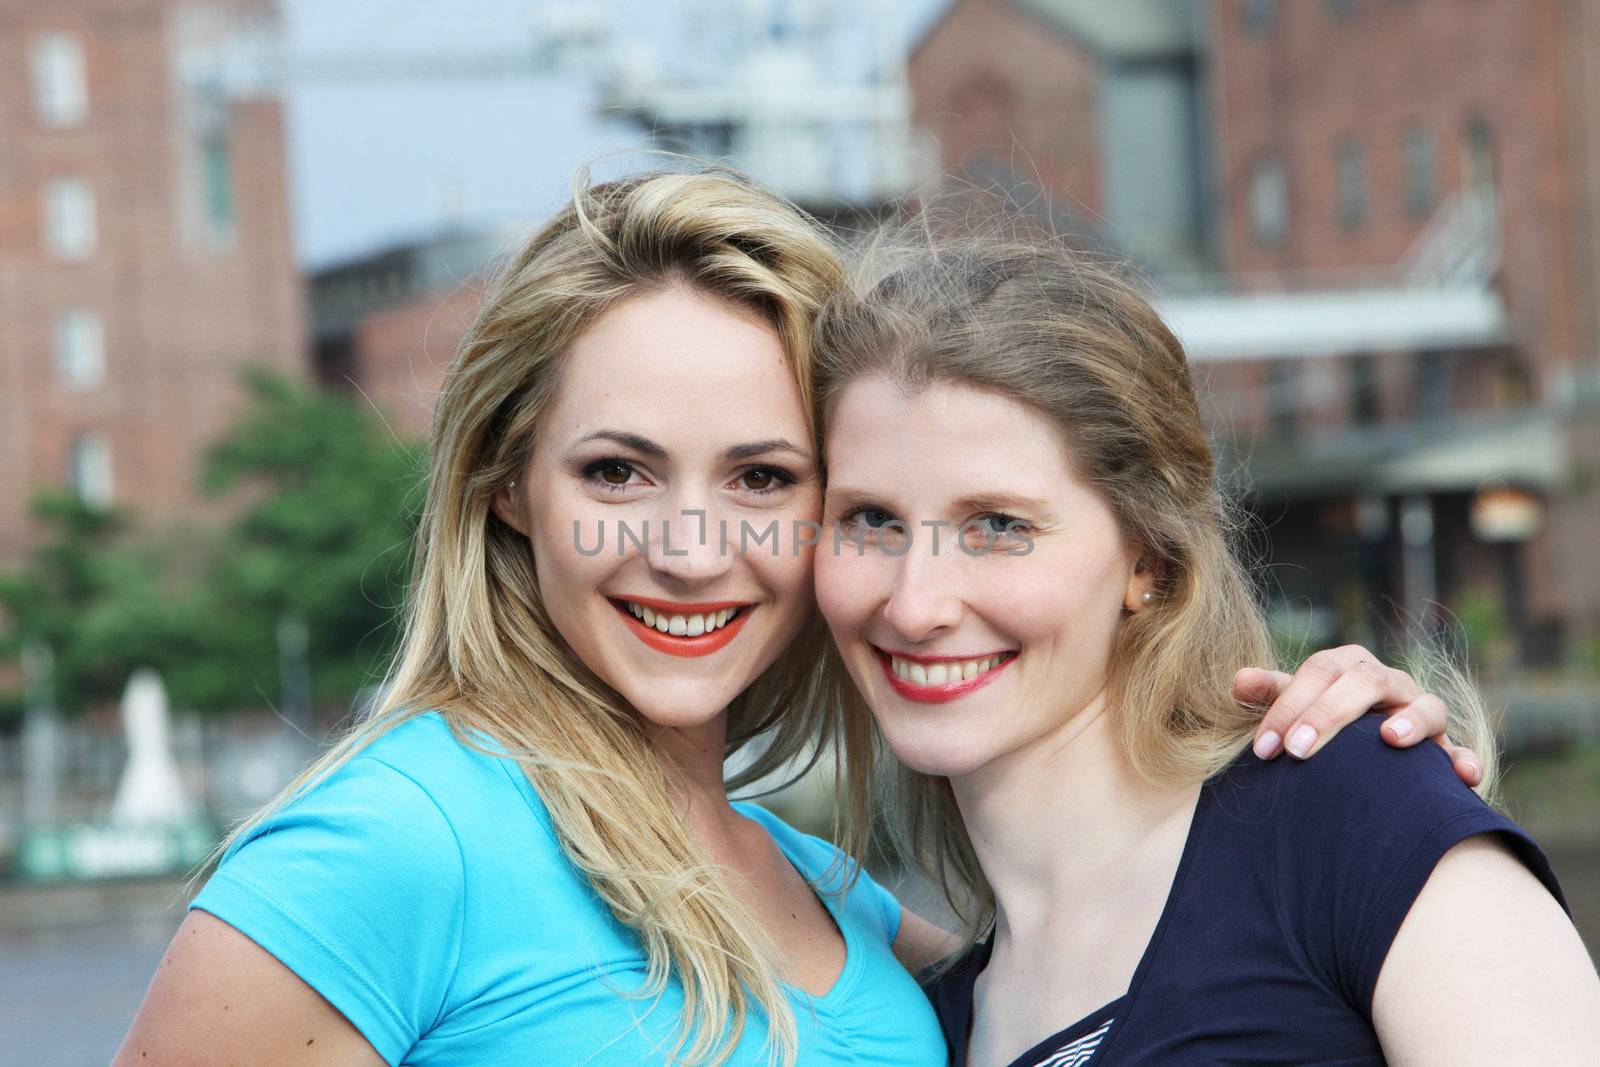 Smiling happy women standing with their heads close together in a display of friendship in an urban environment with buildings 